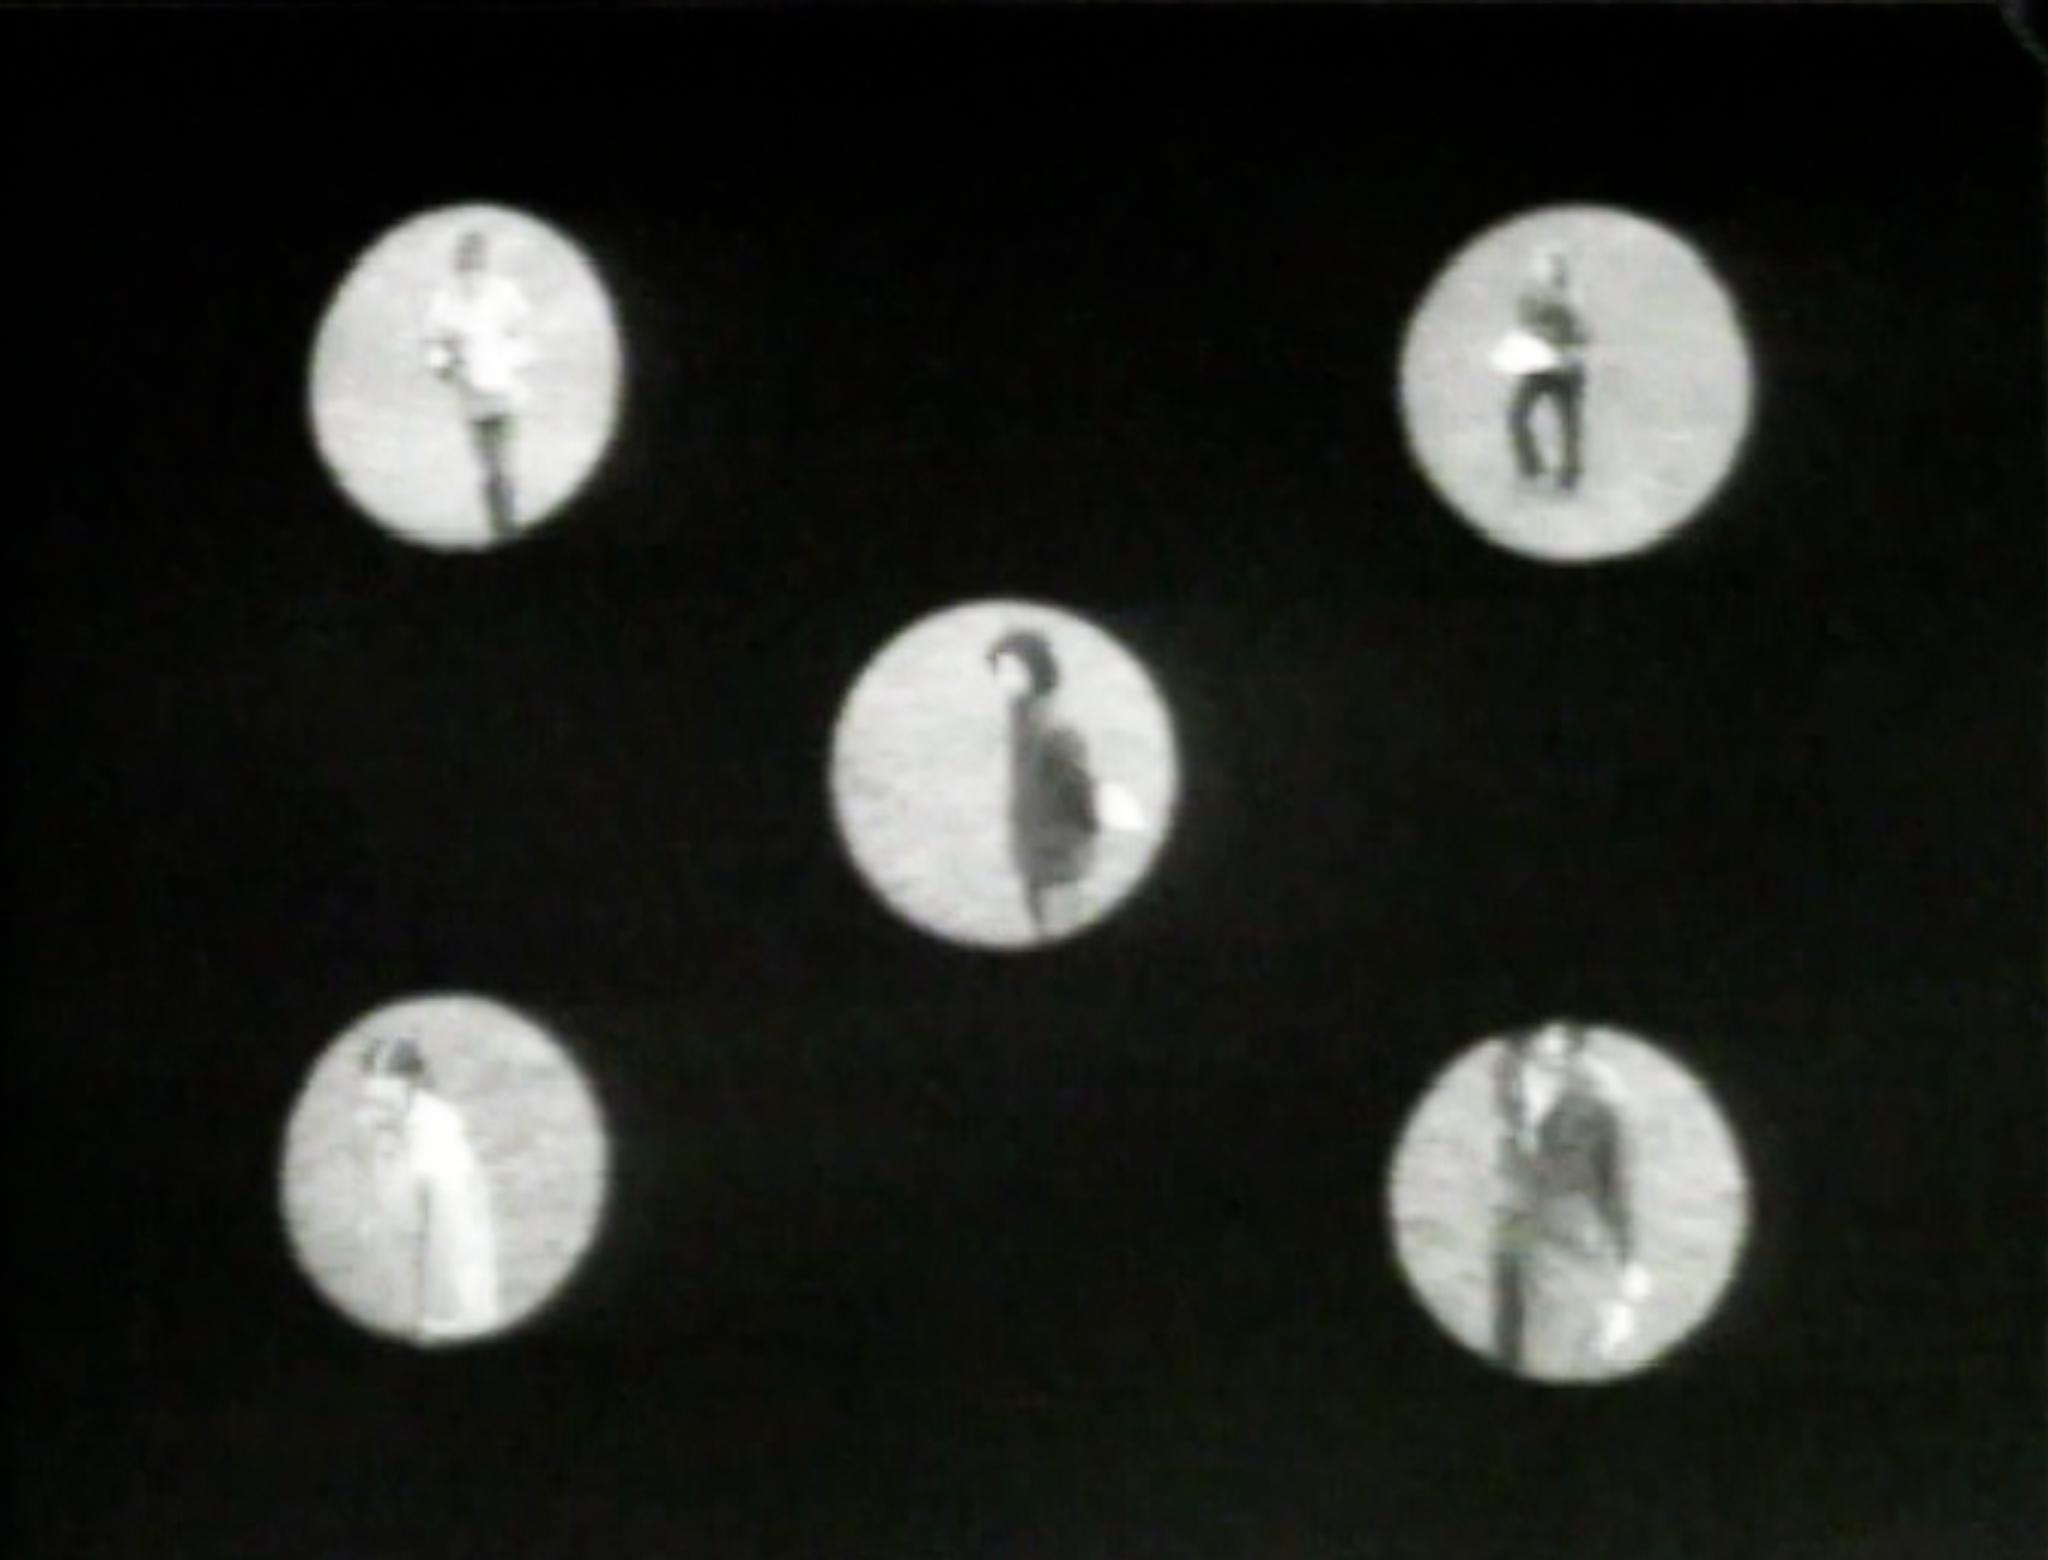 five circles in a black field showing people standing inside of the circle